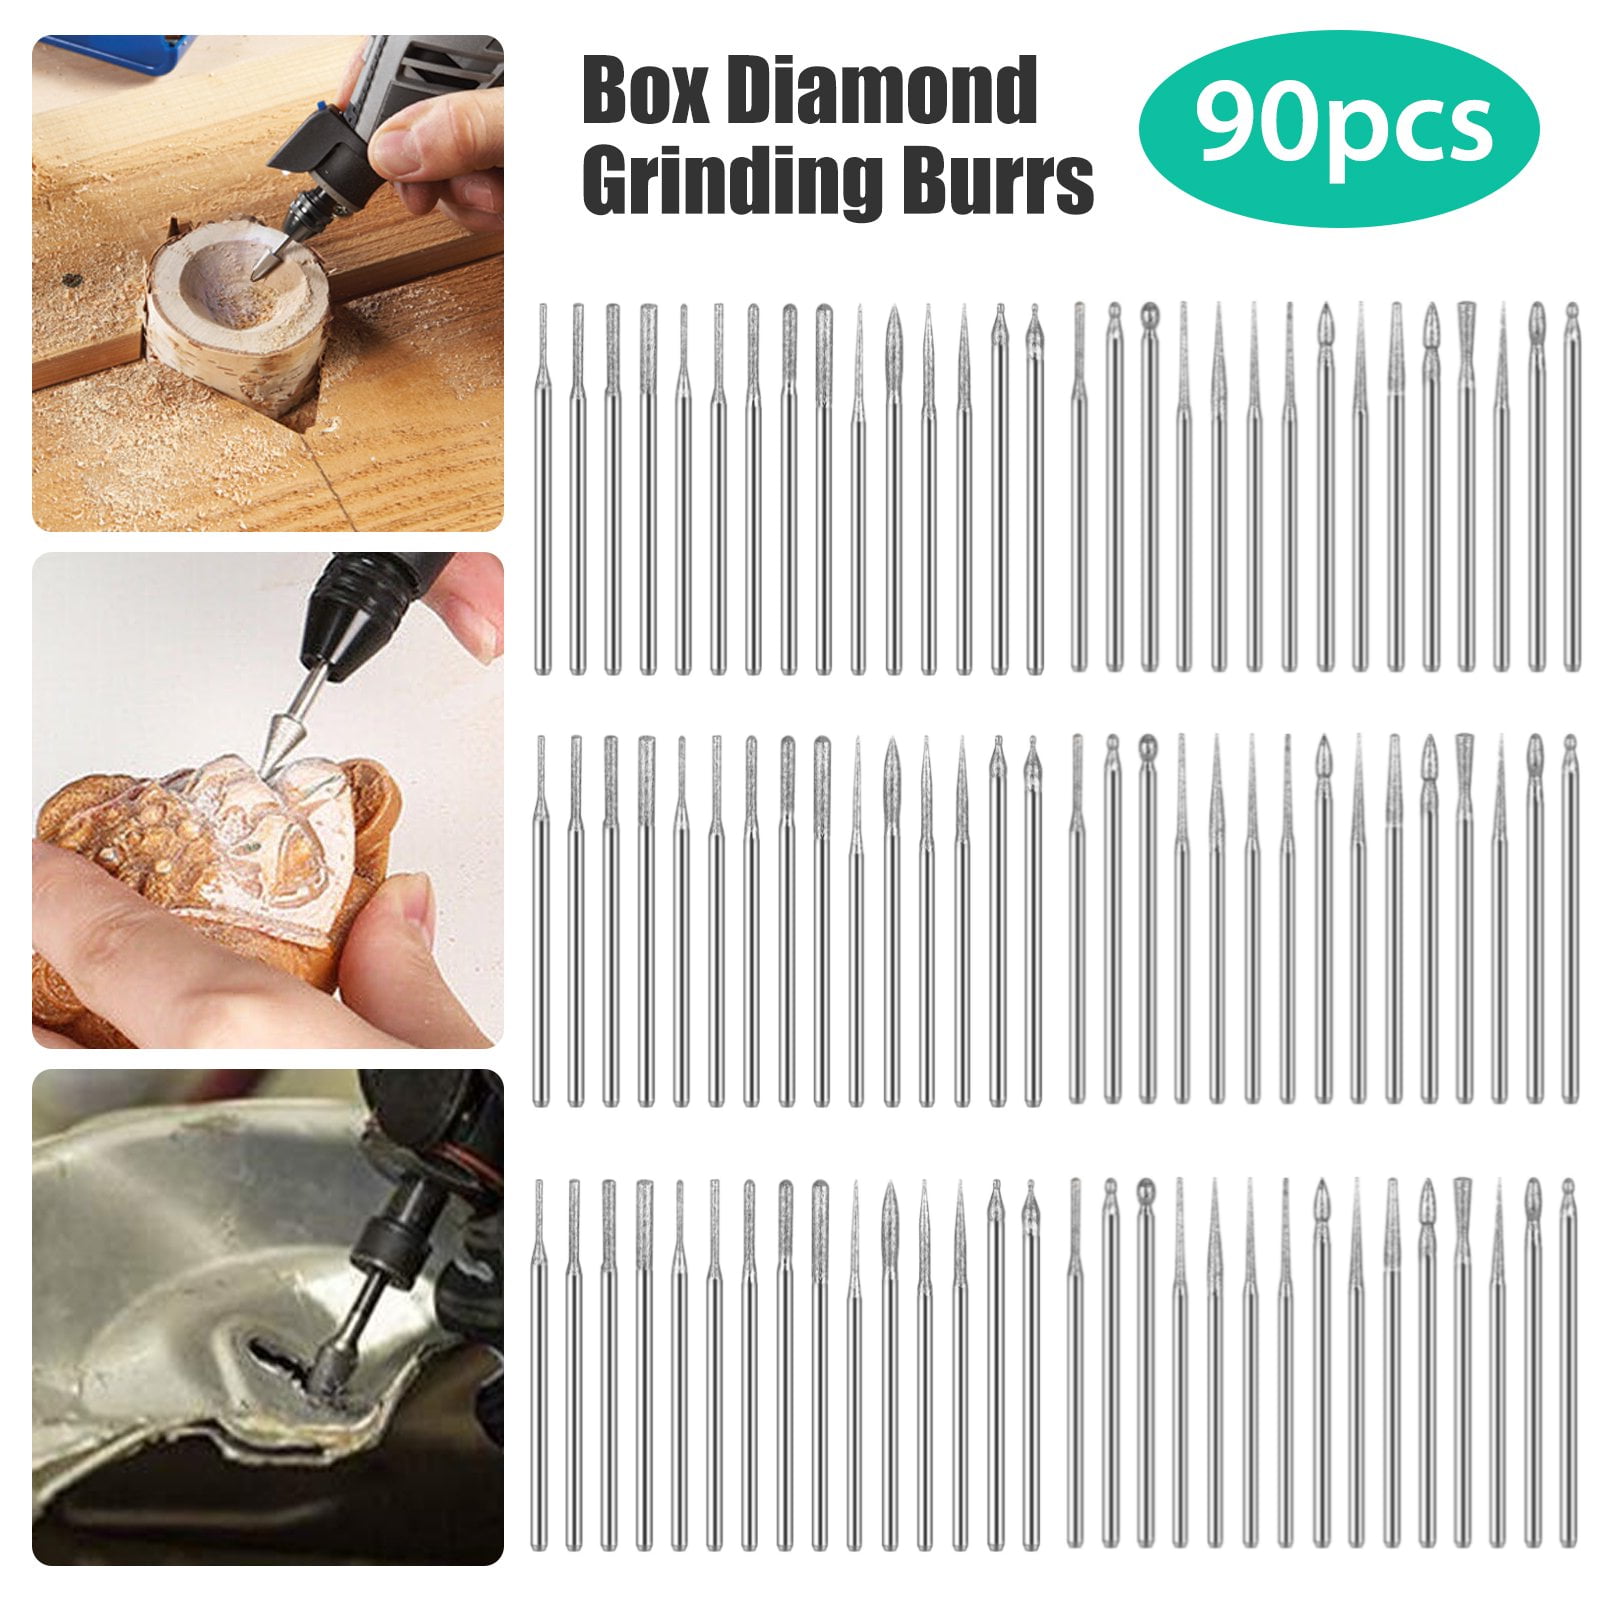 3mm aiyun Diamond Burr Bits Drill Kit for Rotary Tool Metal Woodworking Router Grinding Engraving Carving- 1/8 3mm Shank Shank Pack of 90Pcs 